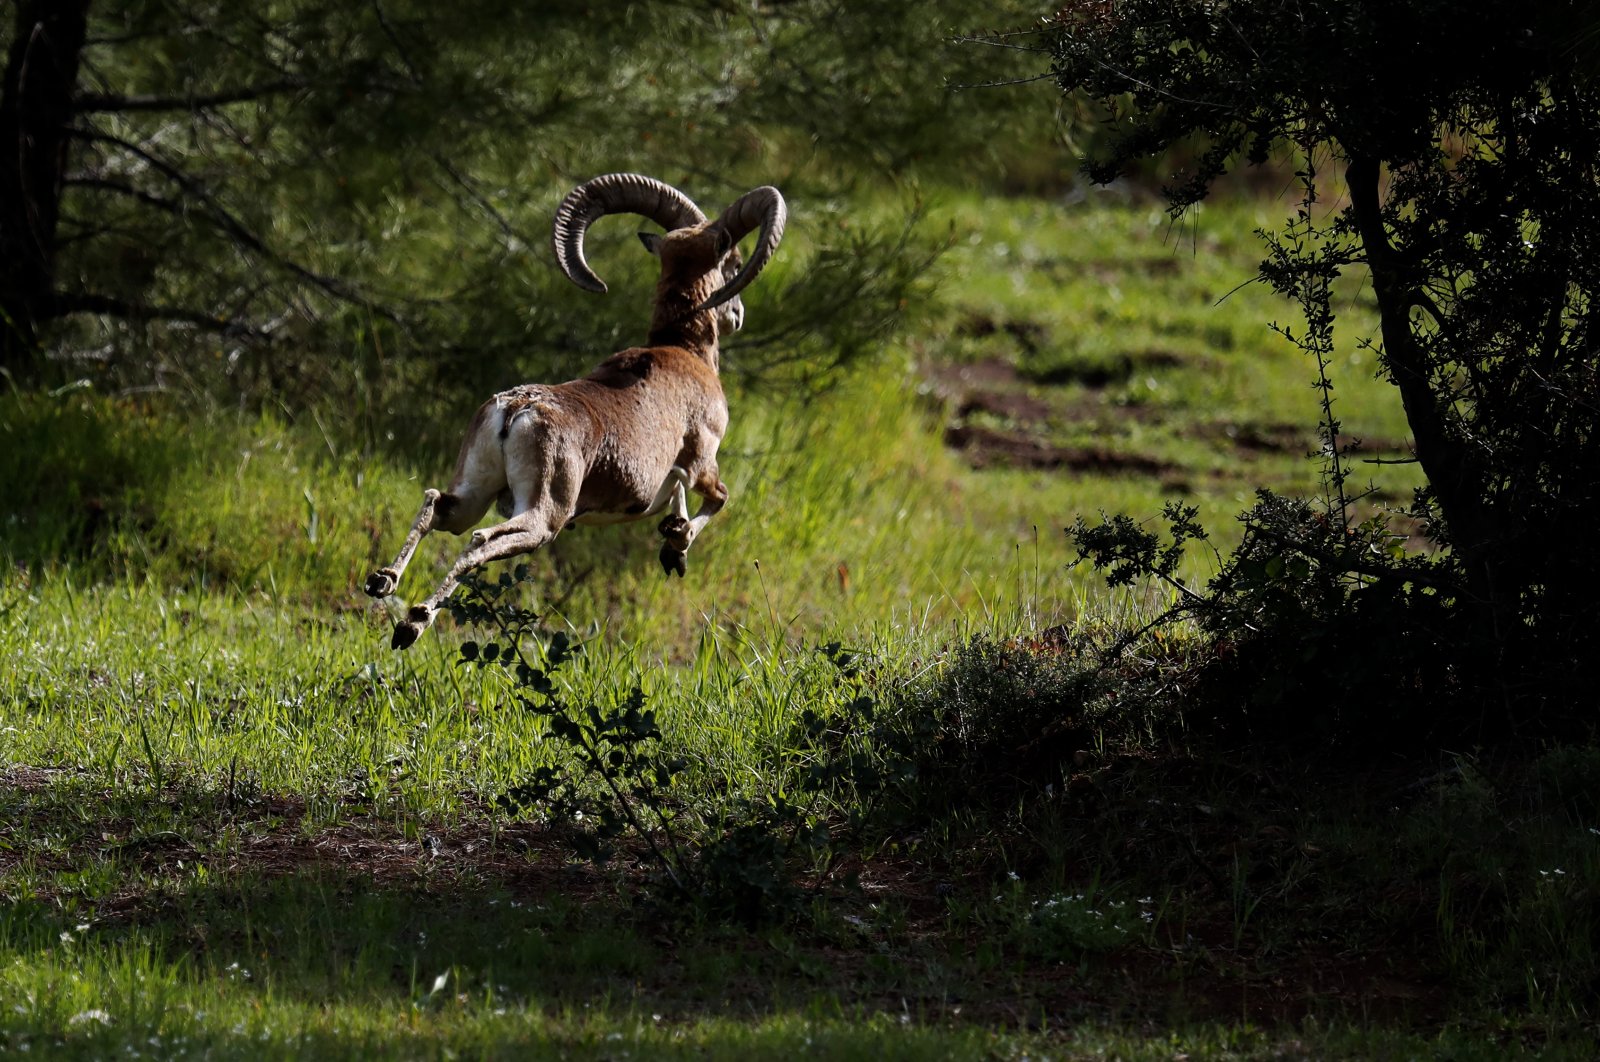 An endangered Mouflon sheep runs in the forest near the abandoned village of Varisia, inside the U.N.-controlled buffer zone that divides the Greek-controlled south and the Turkish-controlled north, on the island of Cyprus, March 26, 2021. (AP Photo)